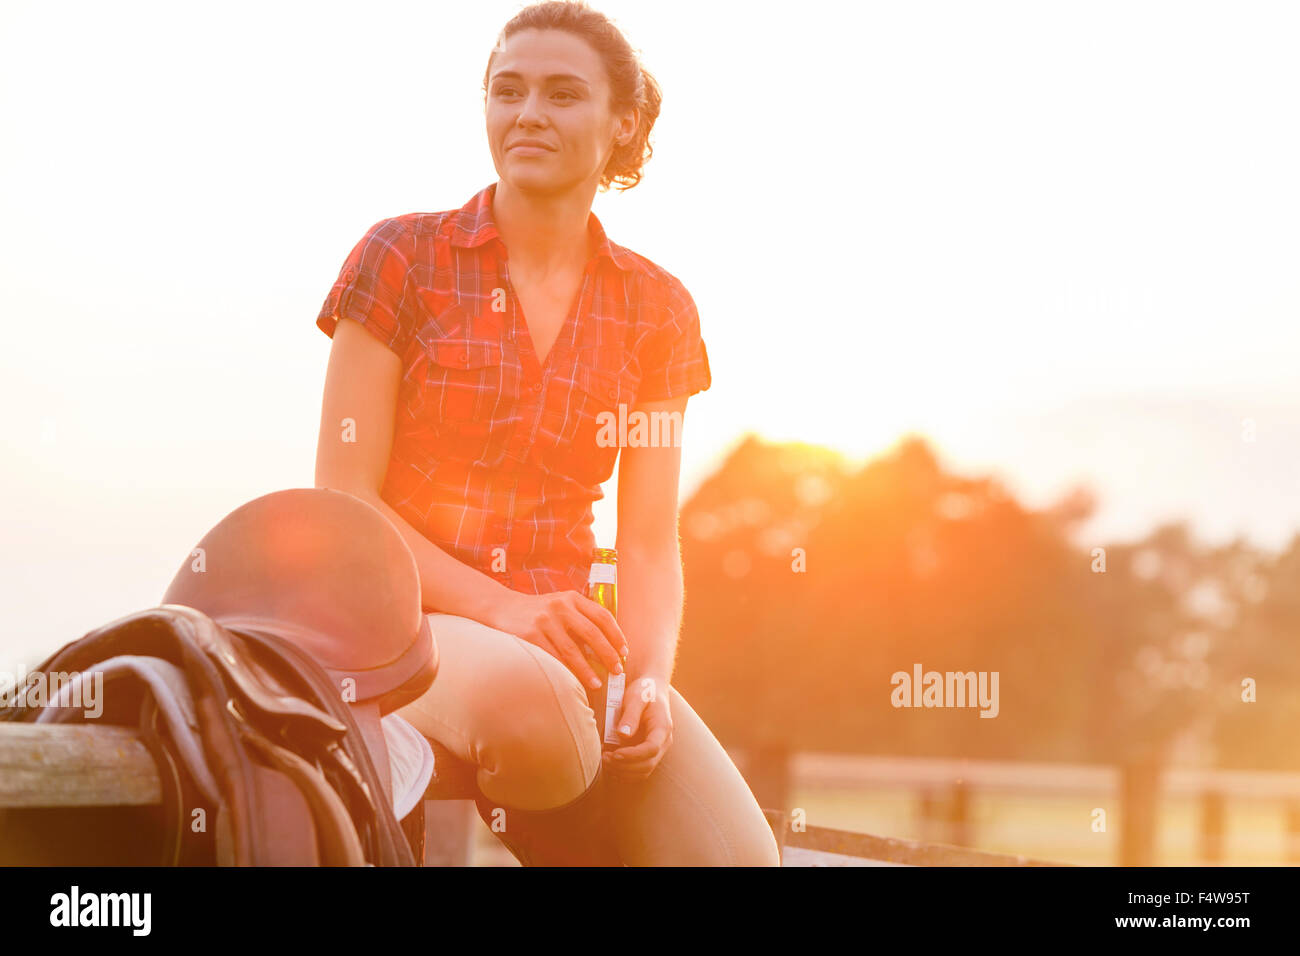 Smiling woman drinking beer next to saddle on rural fence Stock Photo